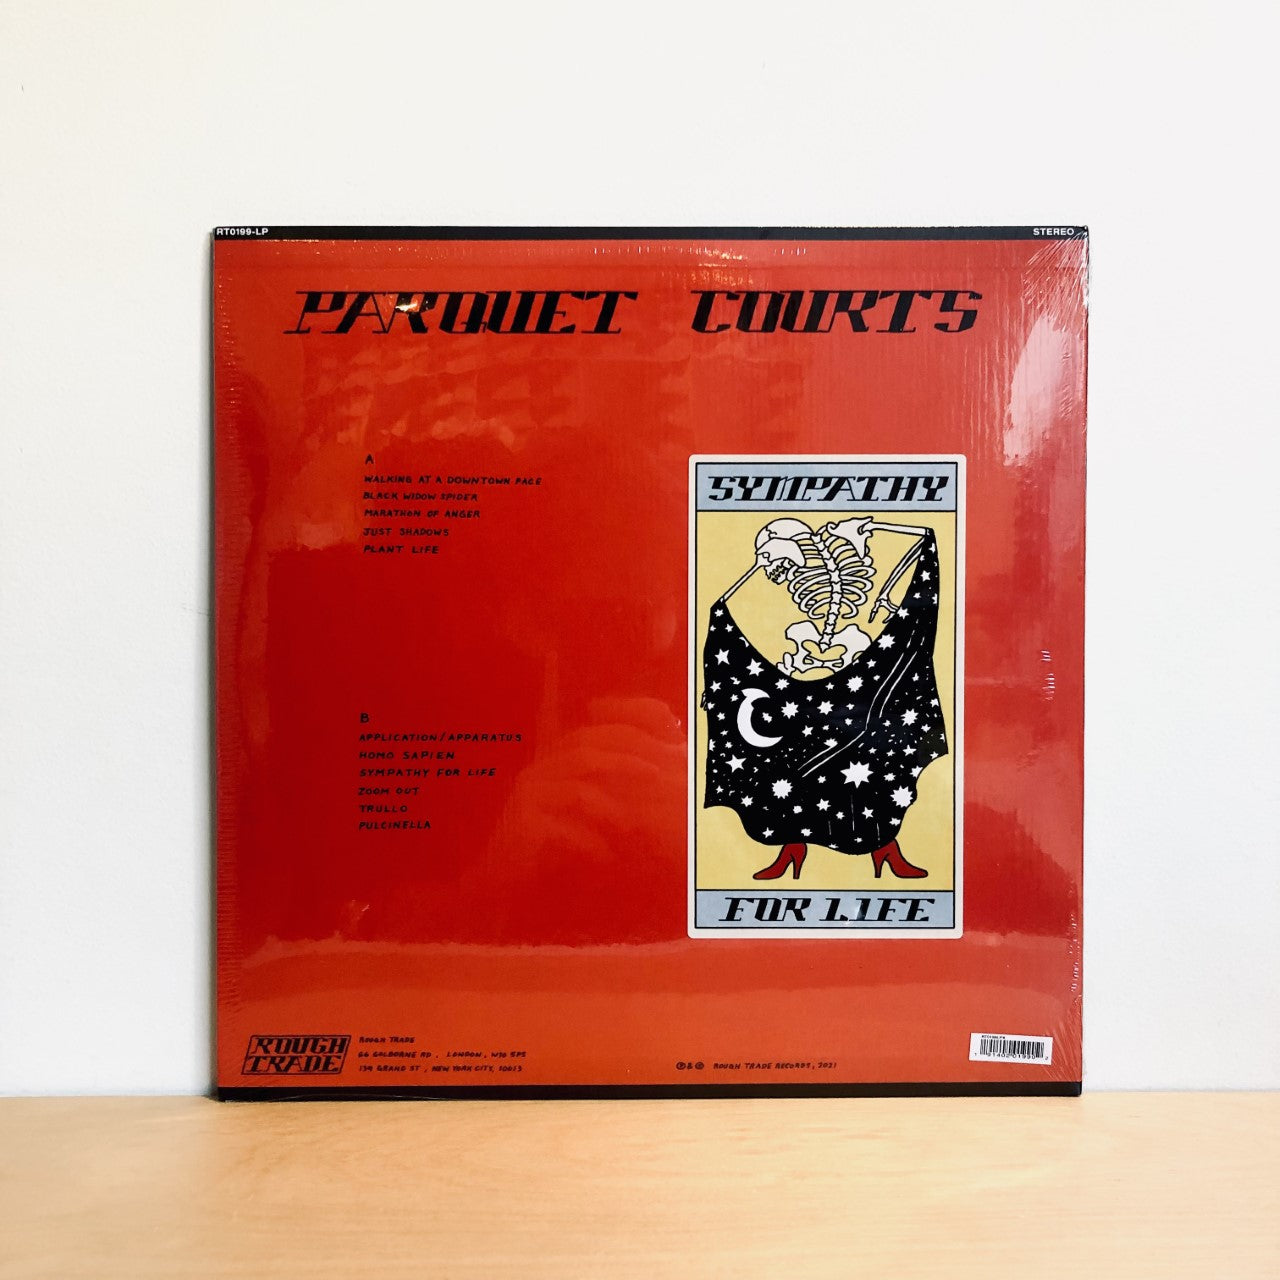 Parquet Courts - Sympathy For Life. LP [Deluxe Edition w/ Tip-On Sleeve]